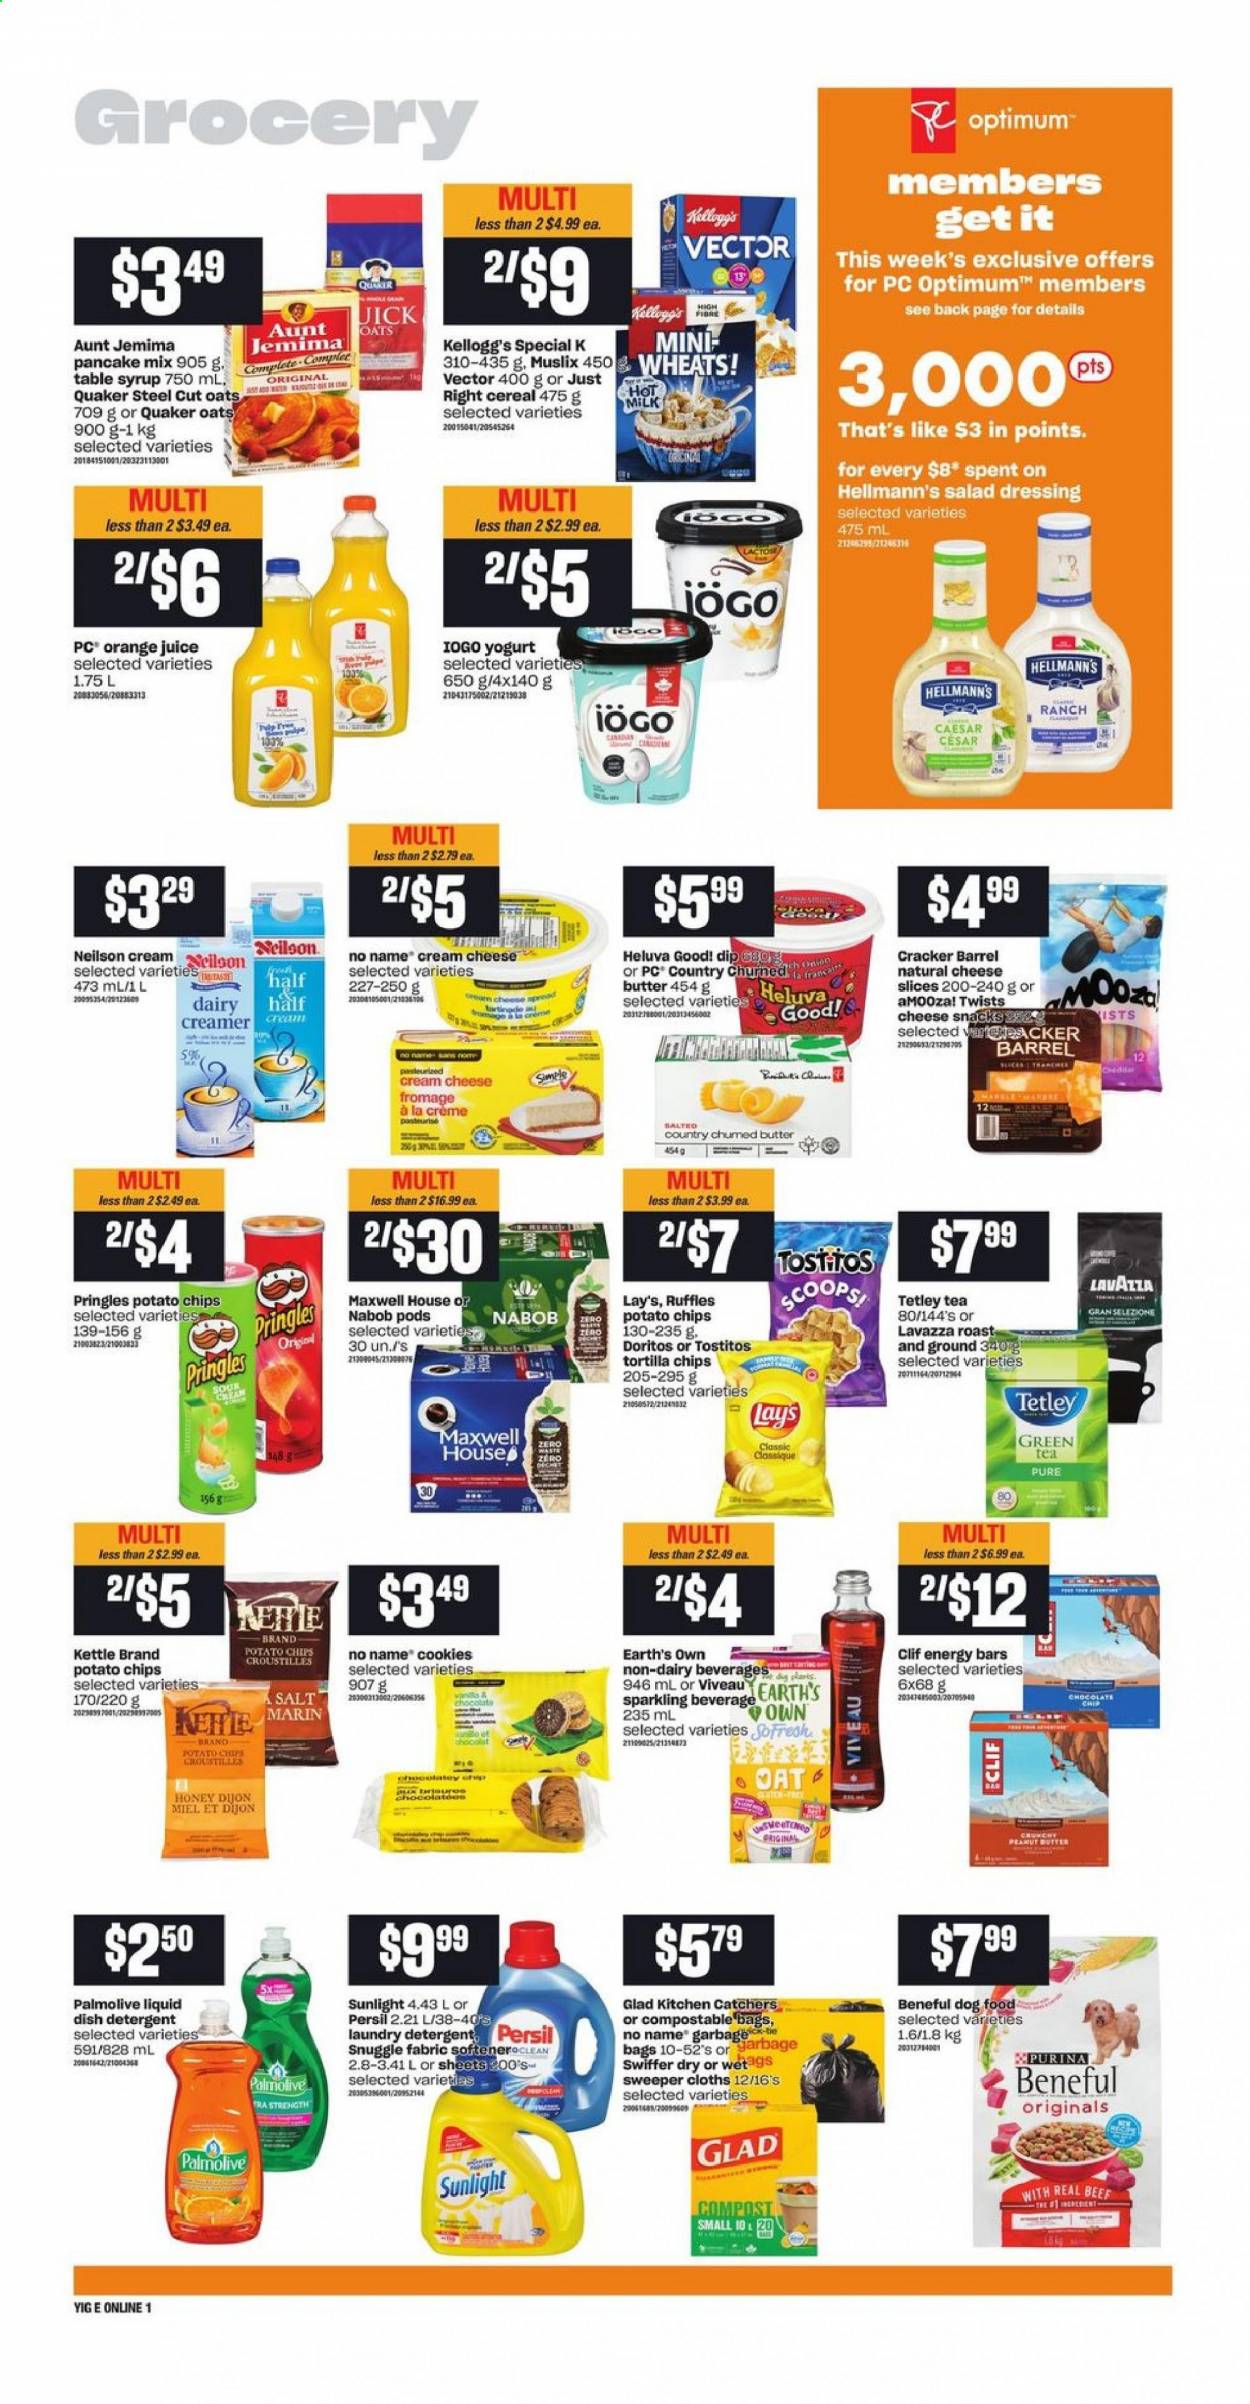 thumbnail - Independent Flyer - April 15, 2021 - April 21, 2021 - Sales products - onion, No Name, pancakes, Quaker, cream cheese, yoghurt, milk, butter, creamer, dip, Hellmann’s, cookies, chocolate, snack, crackers, Kellogg's, Doritos, tortilla chips, potato chips, Pringles, Lay’s, Ruffles, Tostitos, oats, cereals, energy bar, salad dressing, dressing, honey, syrup, orange juice, juice, green tea, Maxwell House, tea, Lavazza, Swiffer, Snuggle, Persil, laundry detergent, Sunlight, Palmolive, animal food, dog food, Purina, Optimum, chips. Page 5.